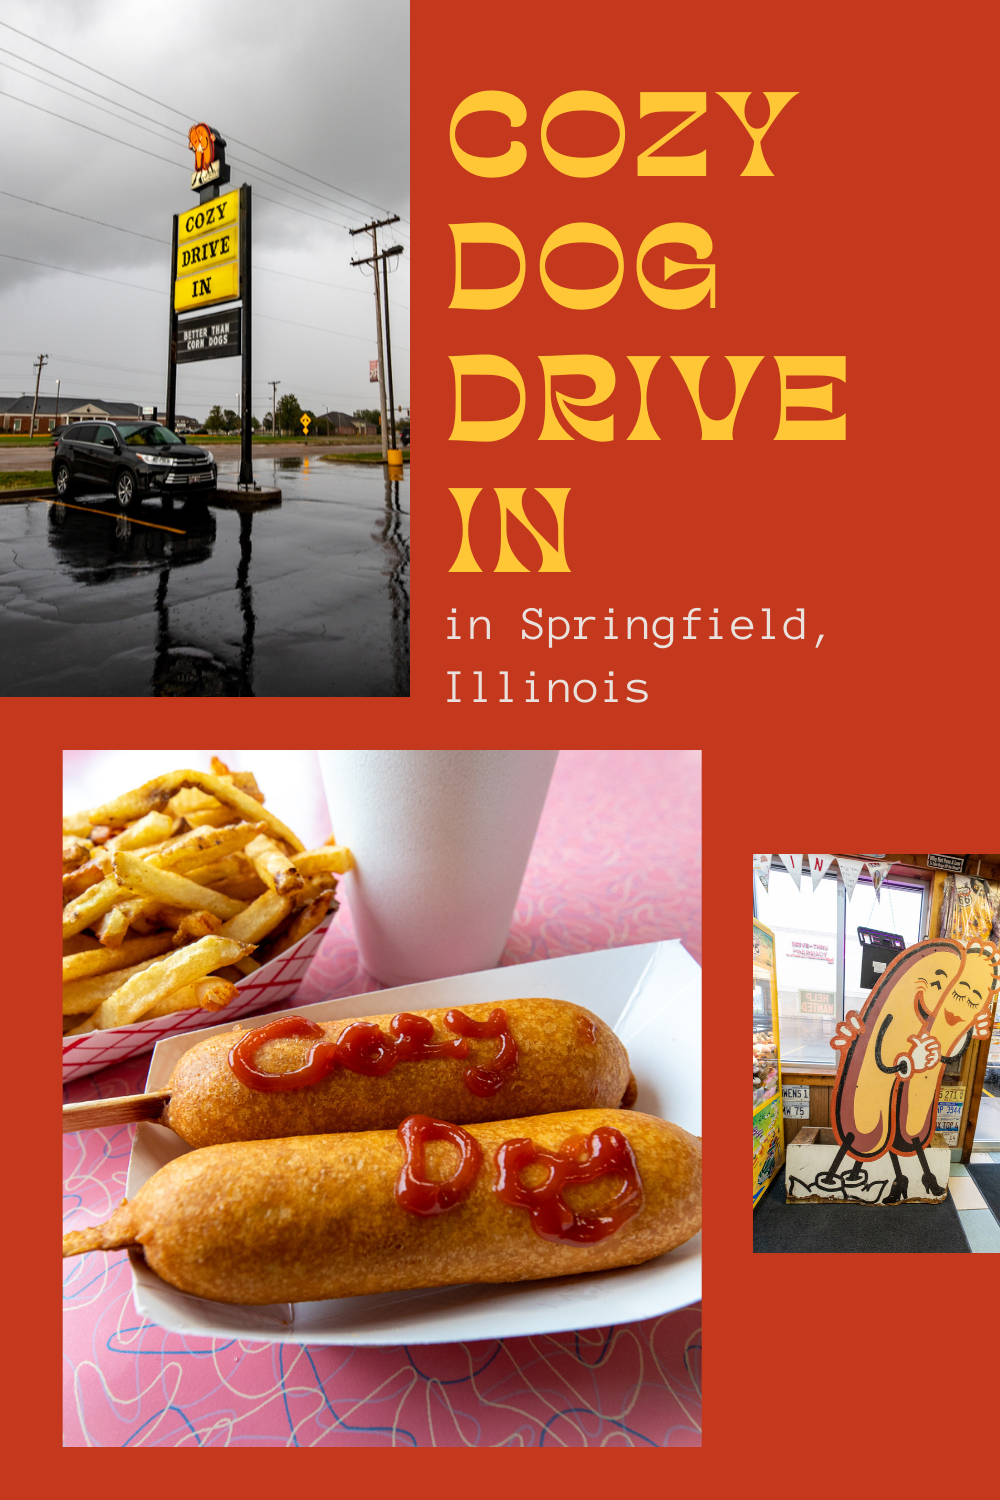 A juicy hot dog skewered on a stick, coated in a  corn laden batter, and deep fried to a crunchy golden brown. Get a taste of history at this Route 66 institution: Cozy Dog Drive In in Springfield, Illinois. Just don’t call it a corn dog. Visit this attraction on a Route 66 road trip through Illinois.  #RoadTrips #RoadTripStop #Route66 #Route66RoadTrip #IllinoisRoute66 #Illinois #IllinoisRoadTrip #IllinoisRoadsideAttractions #RoadsideAttractions #RoadsideAttraction #RoadsideAmerica #RoadTrip